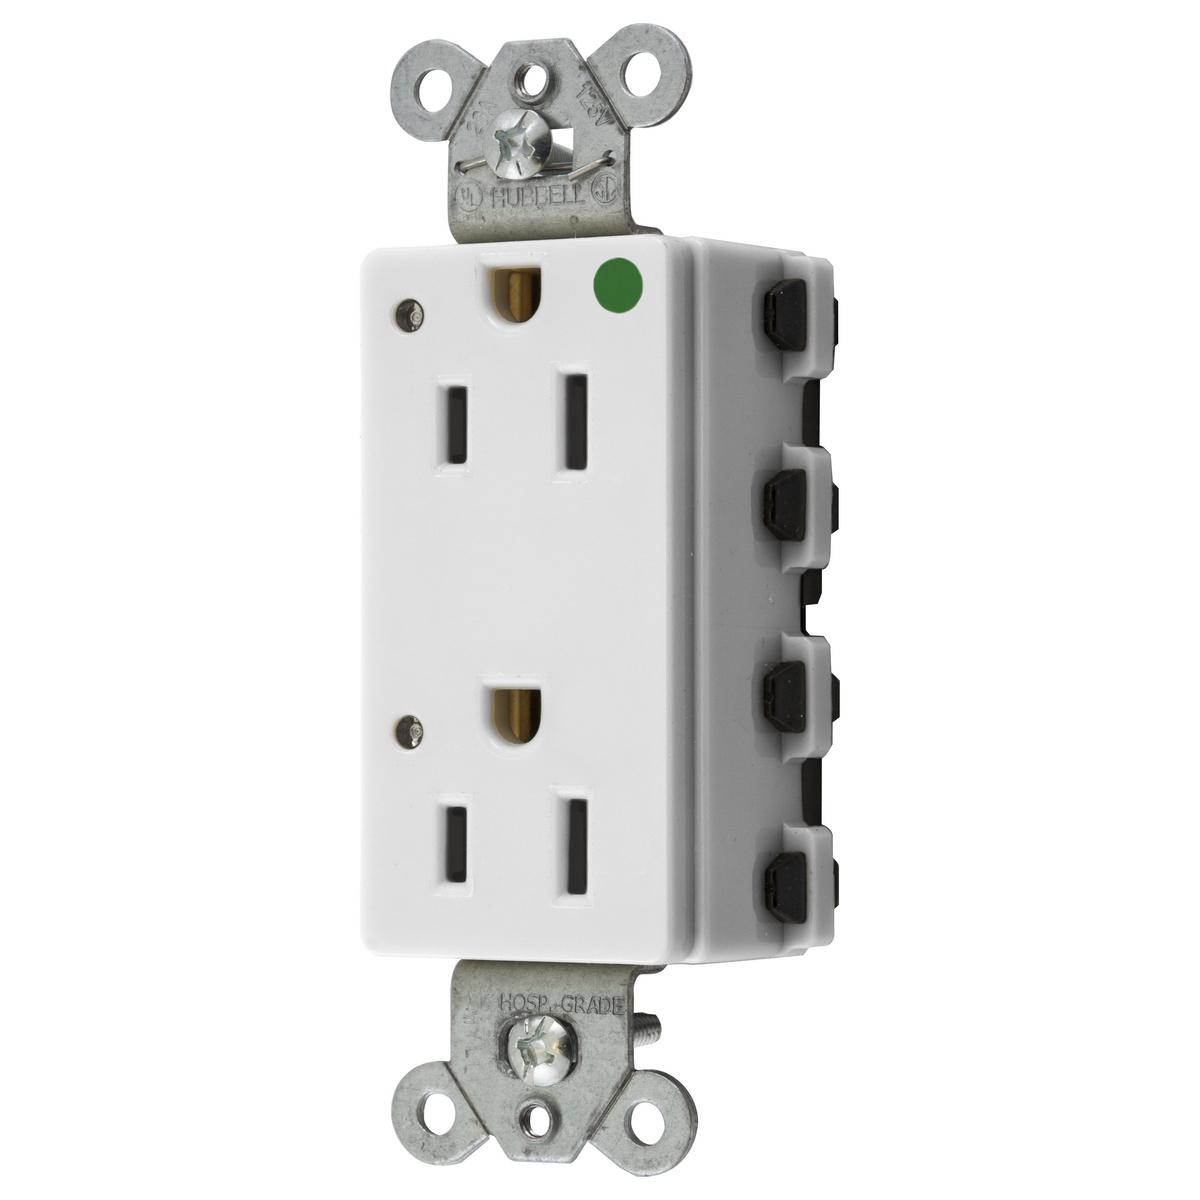 Hubbell SNAP2172WL Straight Blade Devices, Receptacles, Style Line Decorator, SNAPConnect, Hospital Grade, LED Indicator, 15A 125V, 2-Pole 3- Wire Grounding, 5-15R, Nylon, White  ; Audible SNAP, indicates solid connection ; Reduces installation time ; Fully insulated design